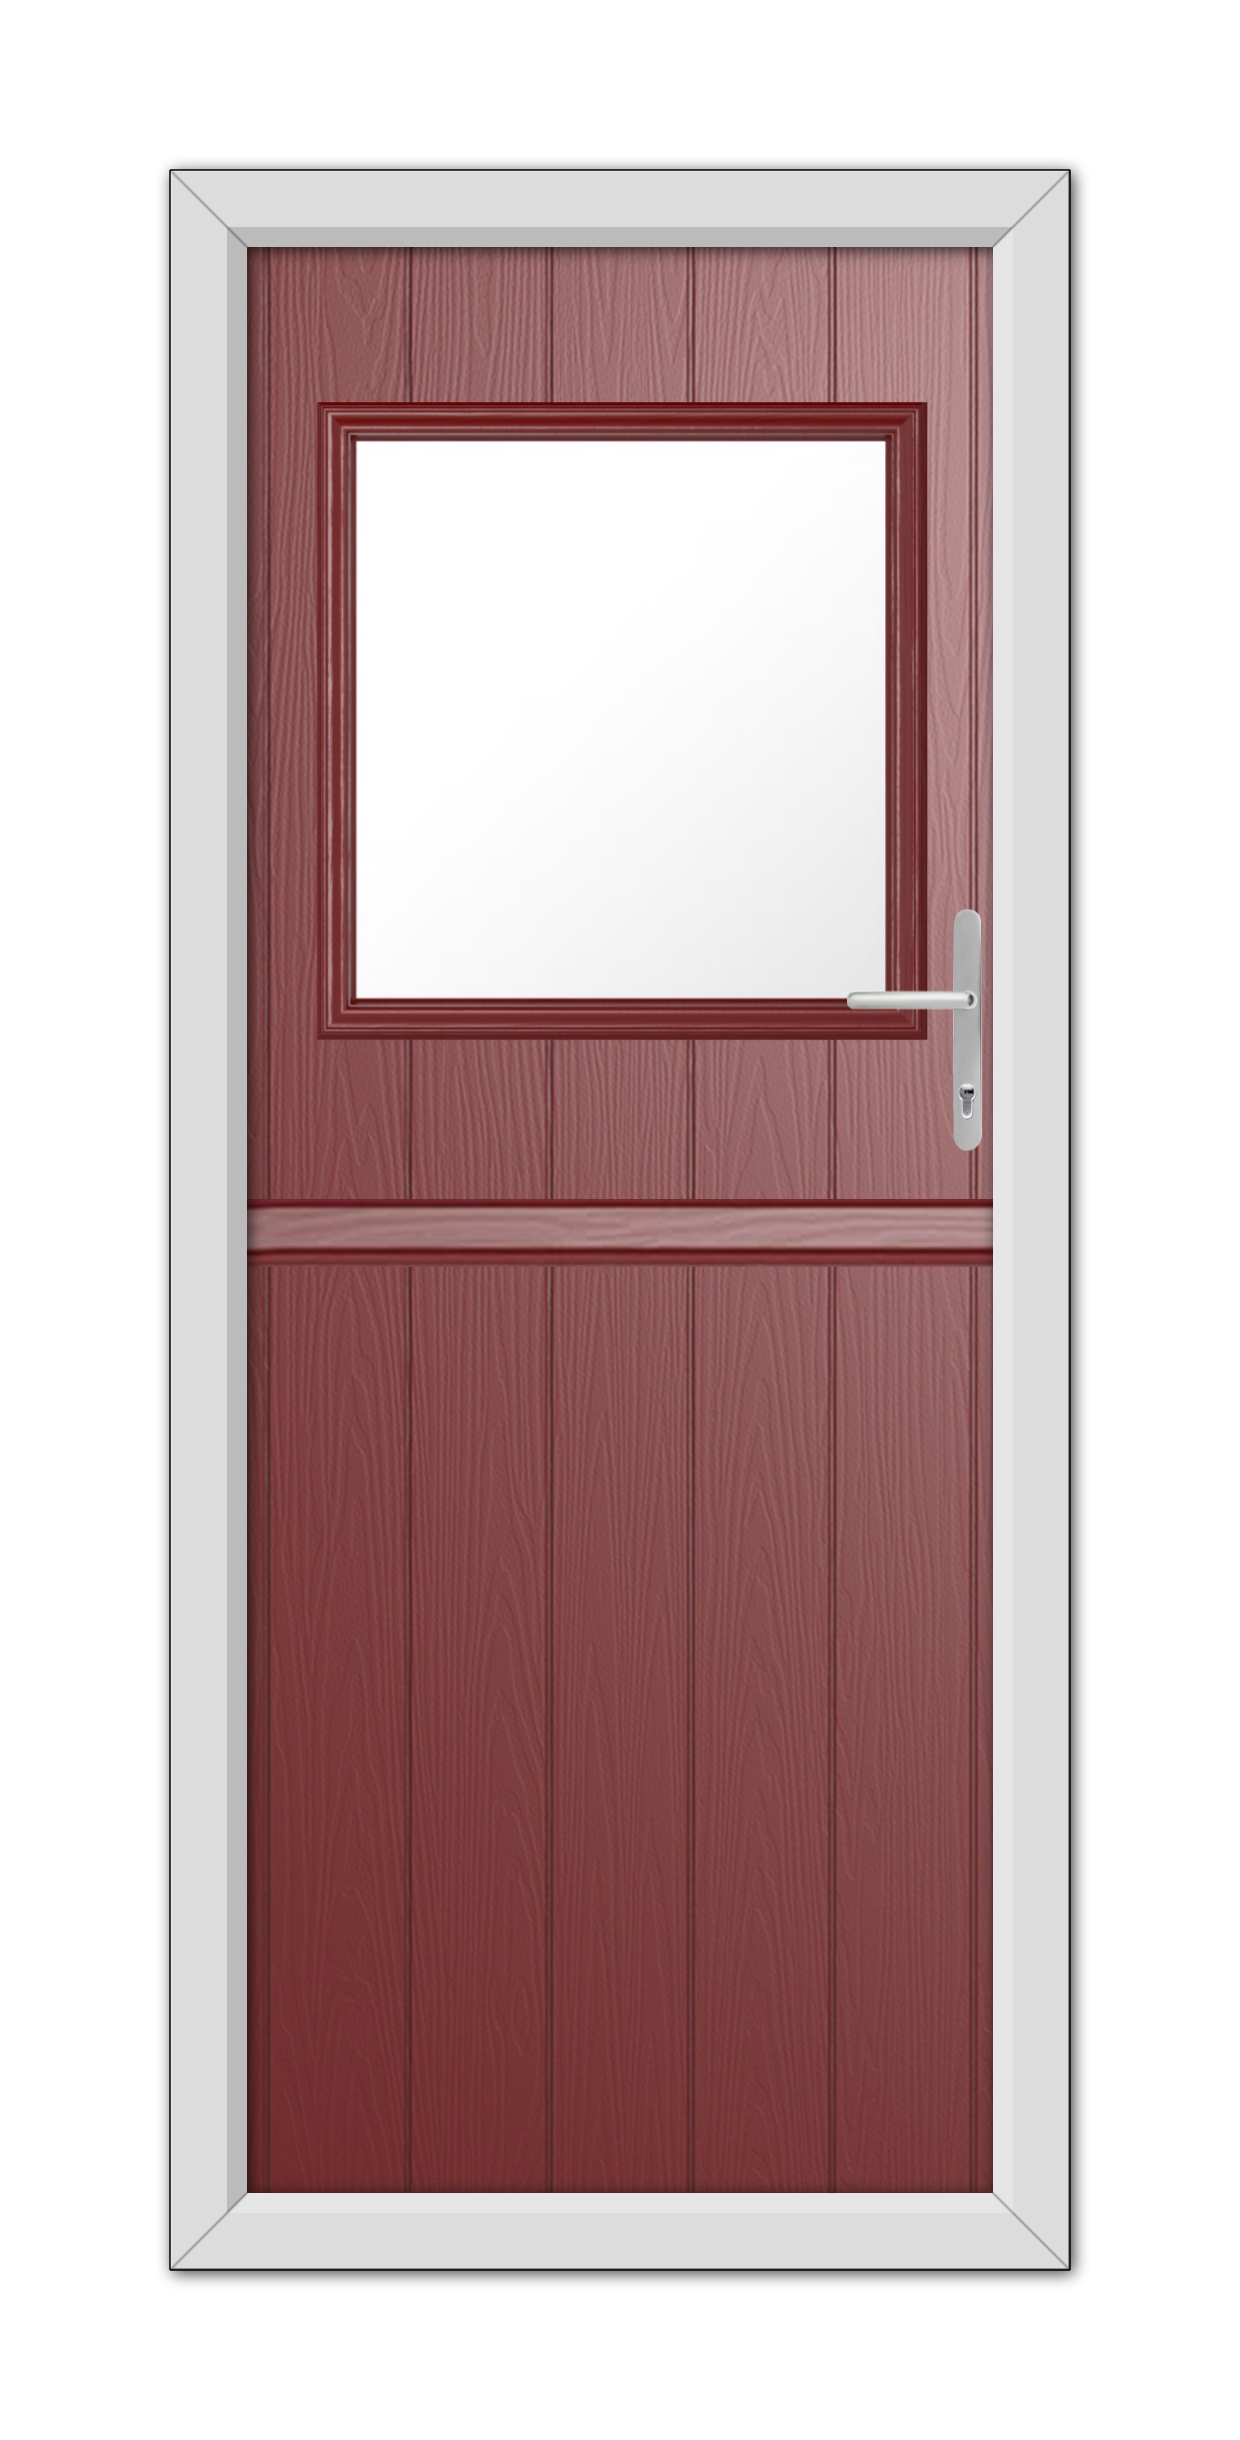 A Red Fife Stable Composite Door 48mm Timber Core with a rectangular window at the top and a white handle on the right, set in a white frame.